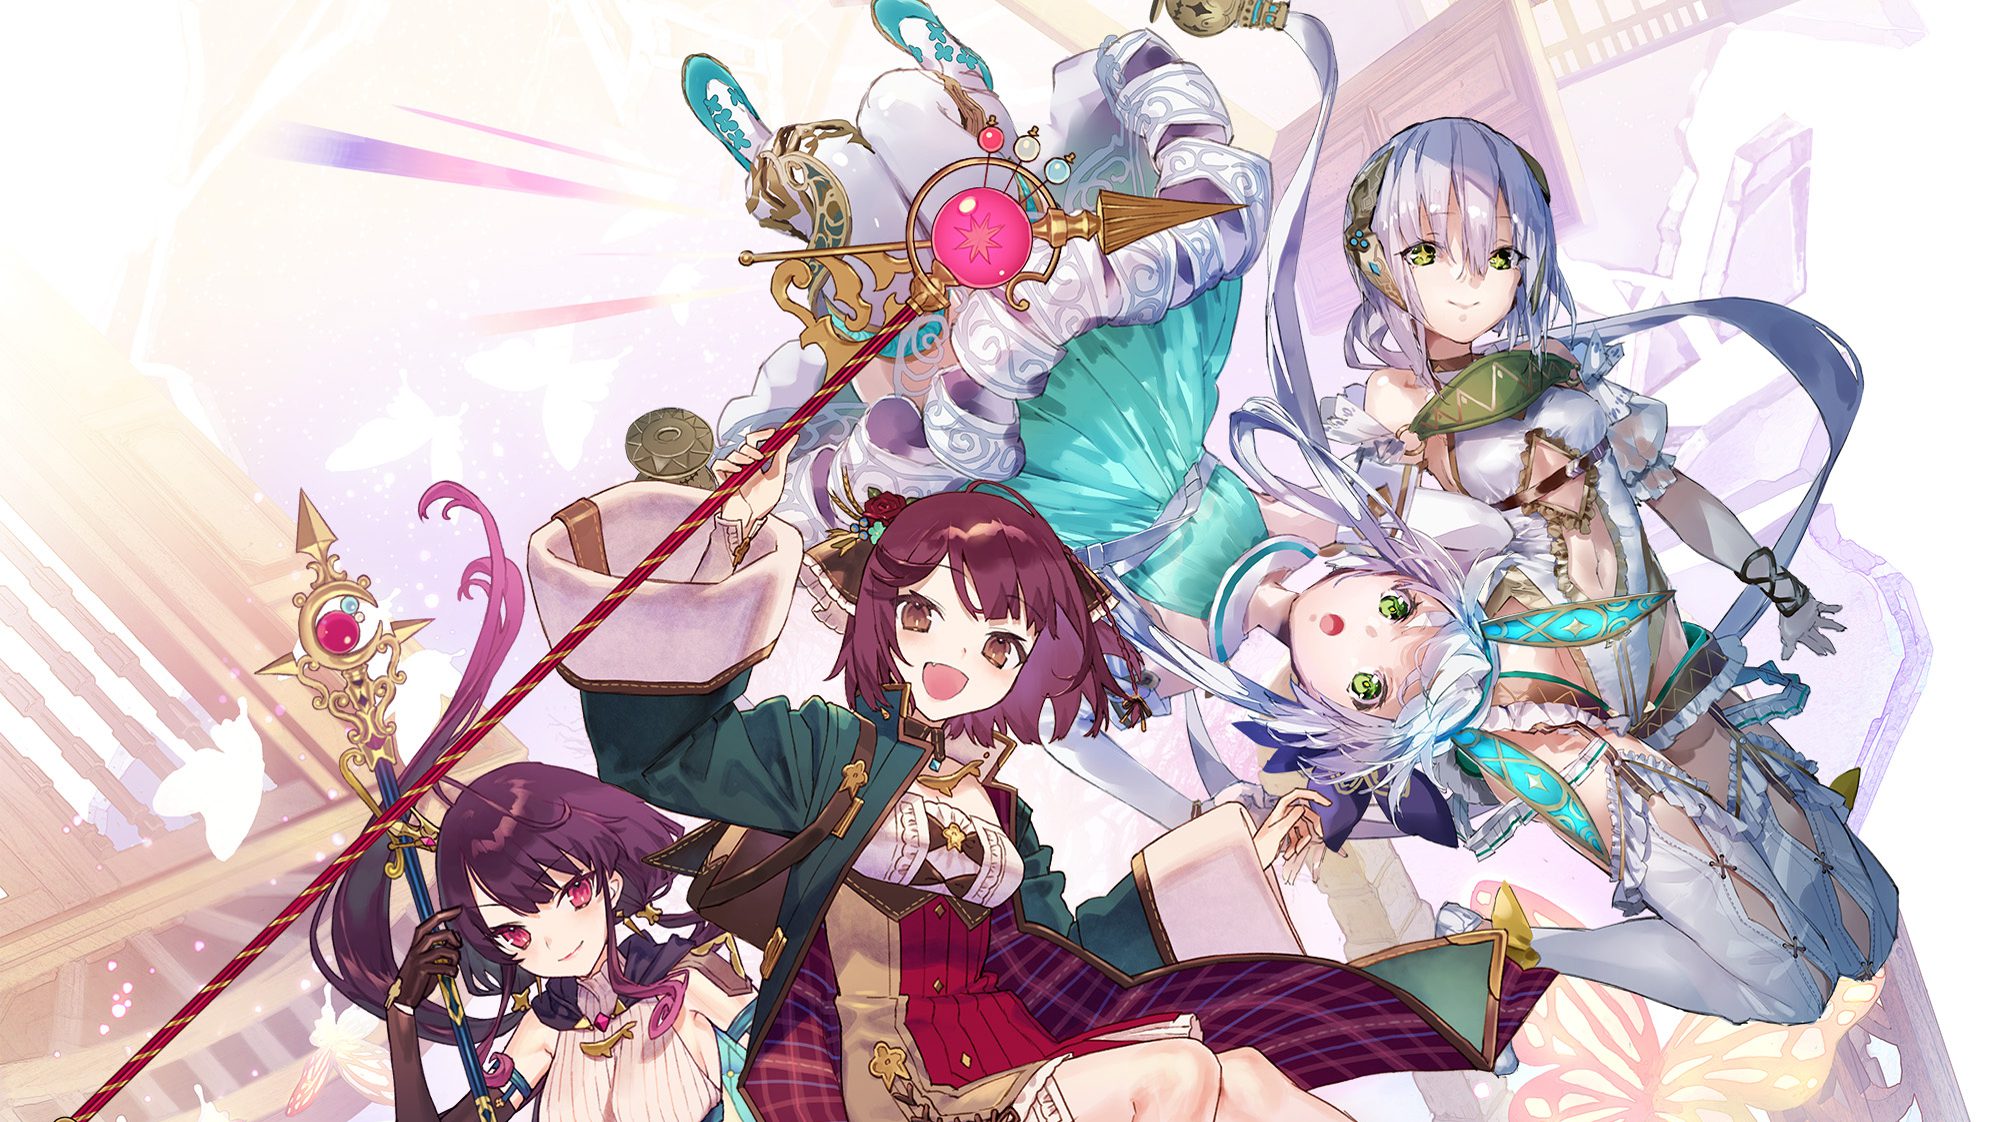 Atelier Sophie 2: The Alchemist of the Mysterious Dream will conjure up an adventure next year thumbnail